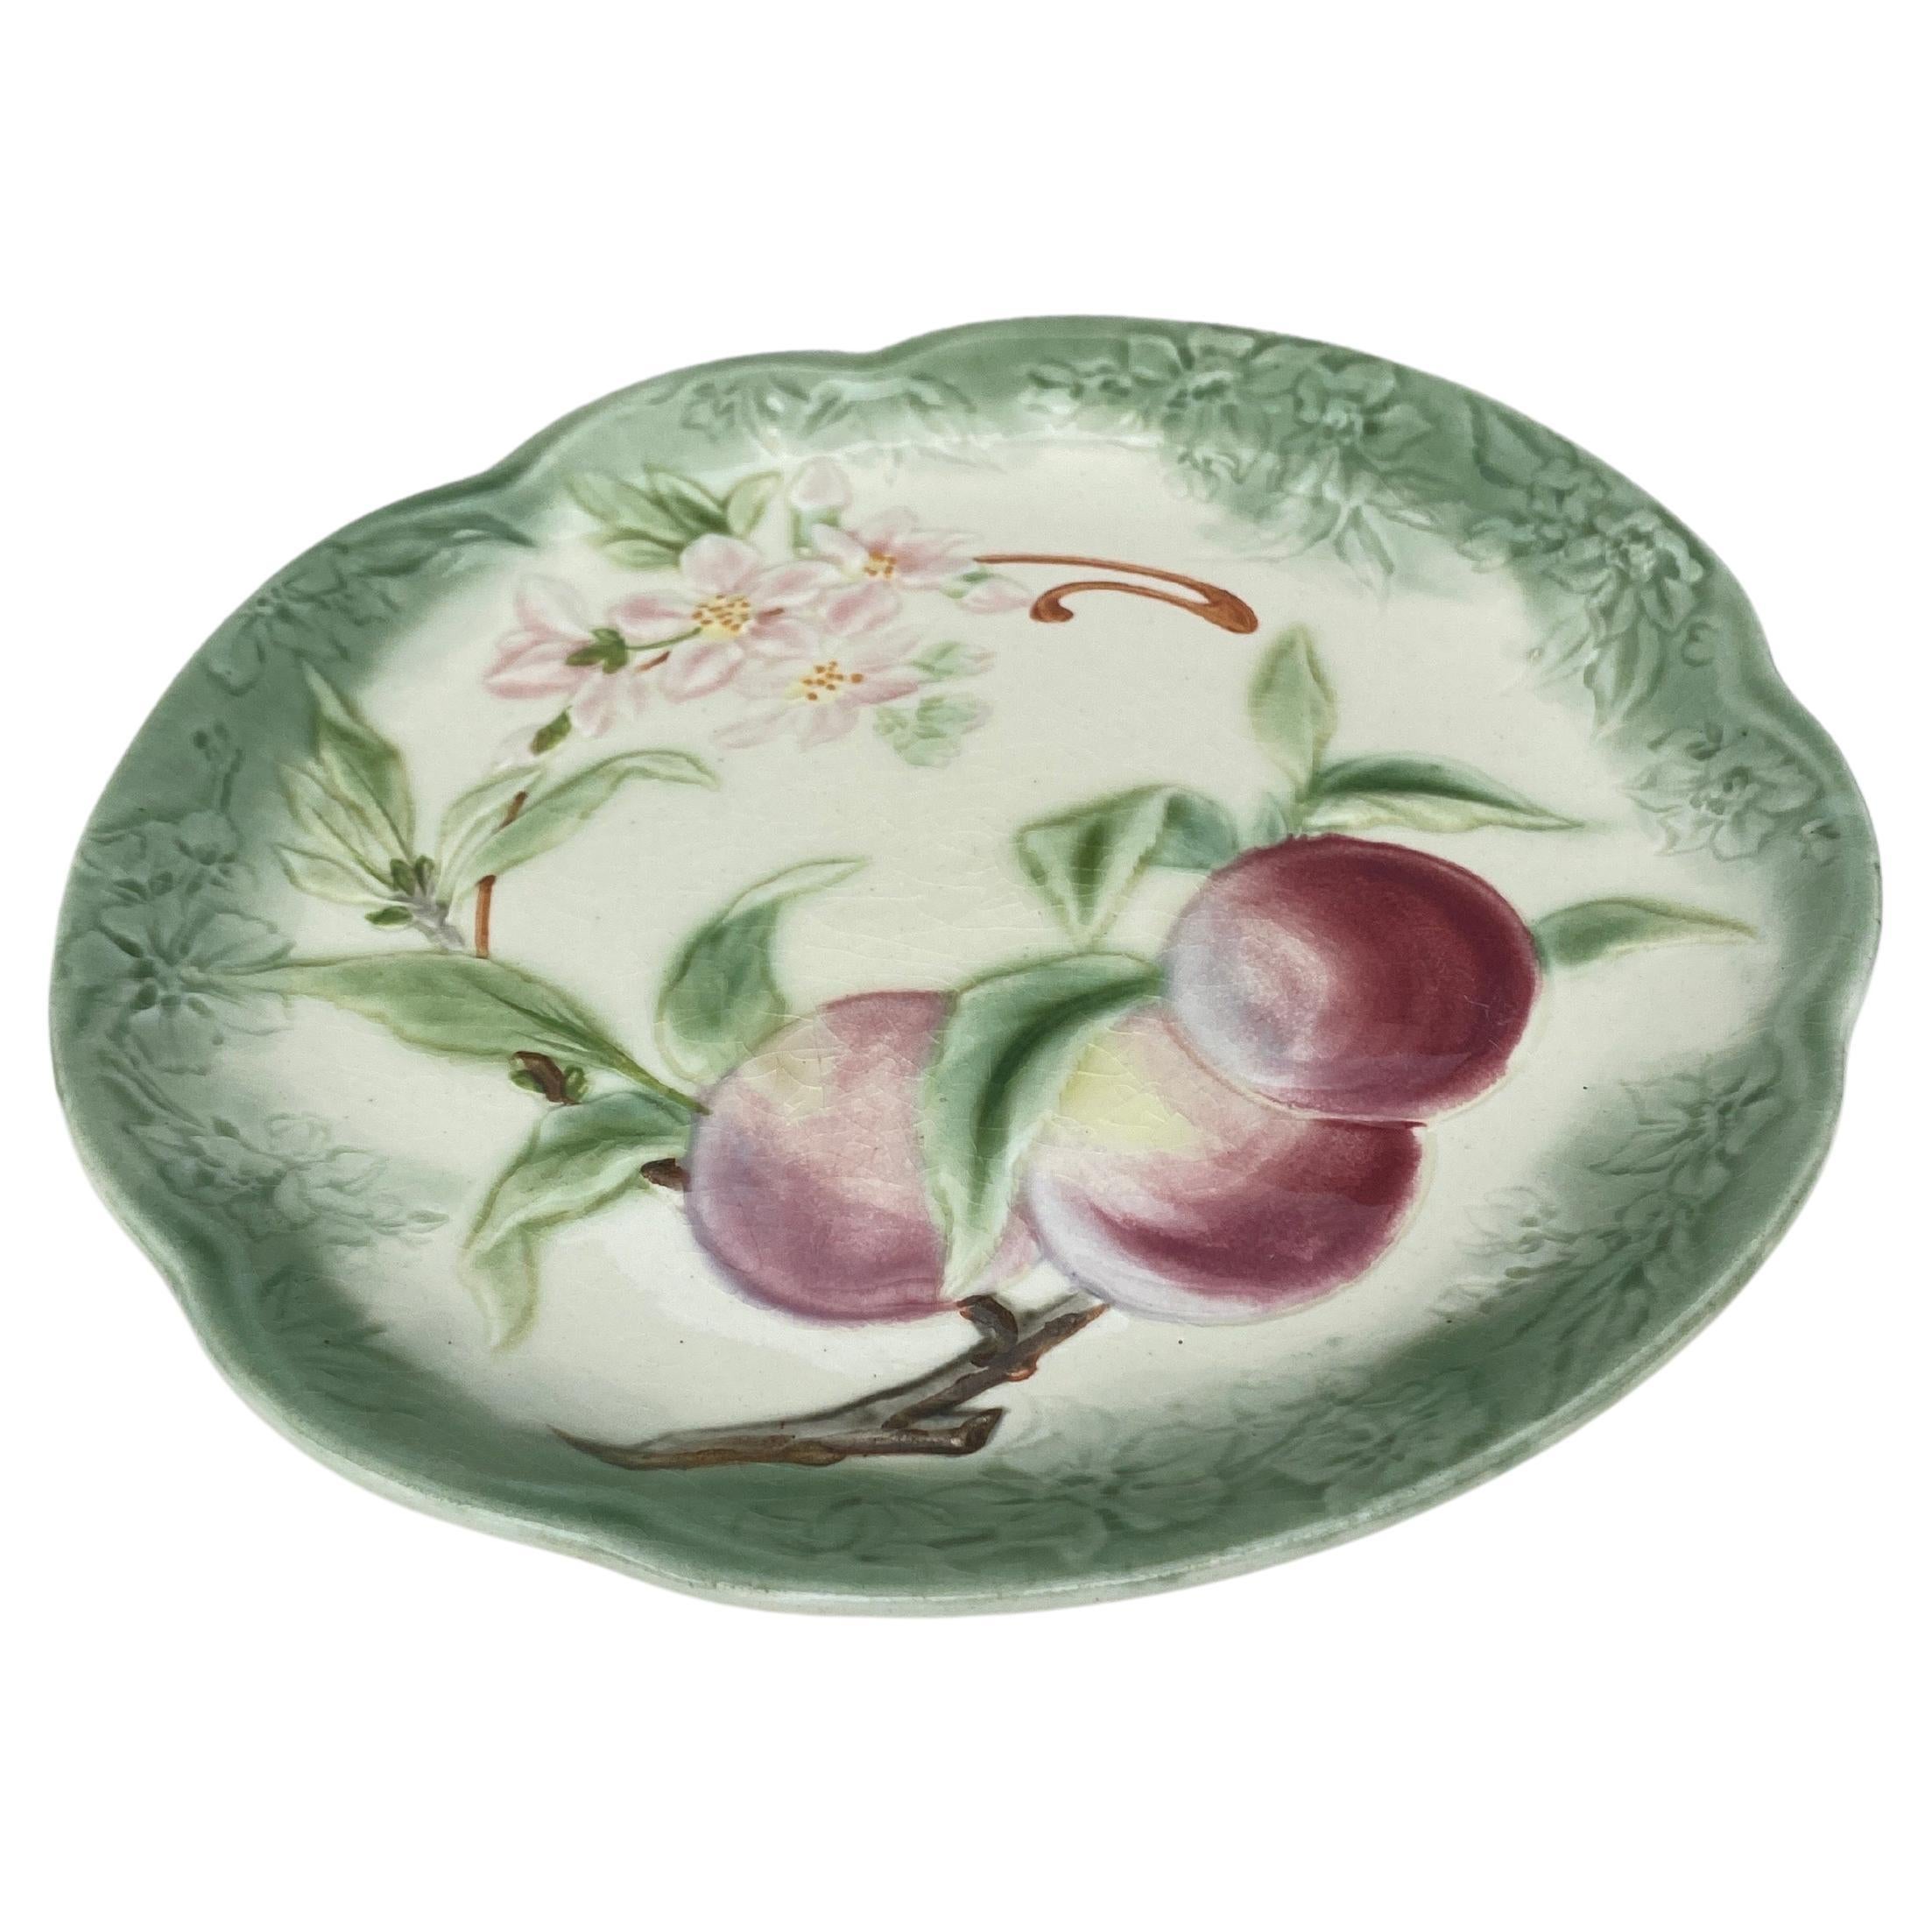 19th Century Majolica apples plate signed Choisy Le Roi.
Made for Higgins & Setter New York.
The Higgins & Seiter Company of New York City began selling decorations for the table, including rich-cut glass in 1887. By 1891 the firm was